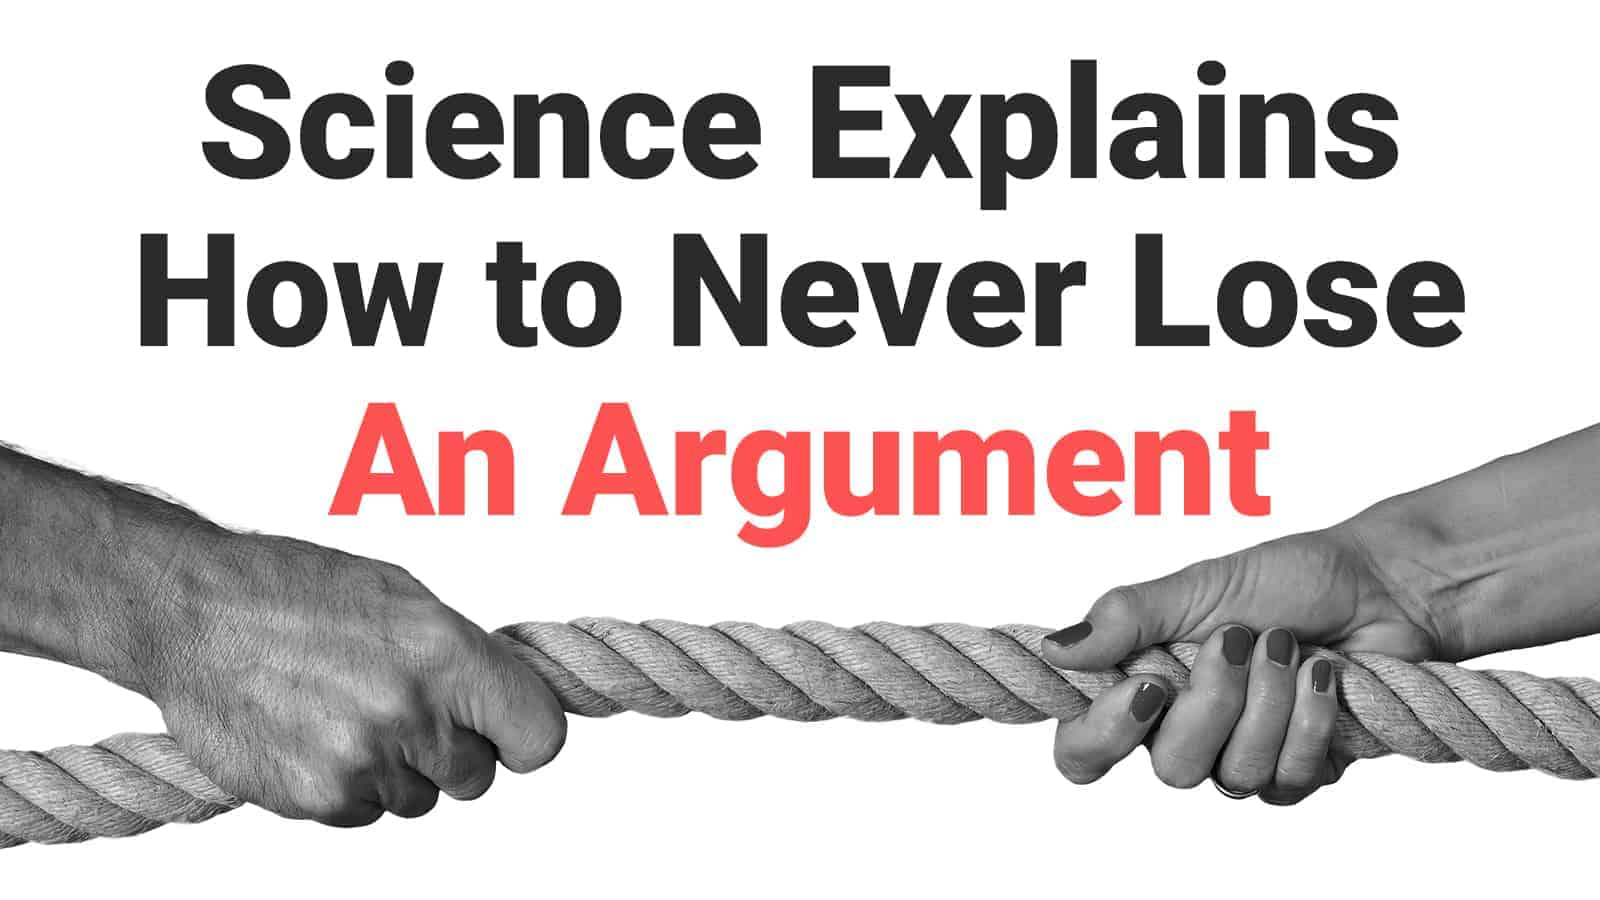 Science Explains How to Never Lose An Argument